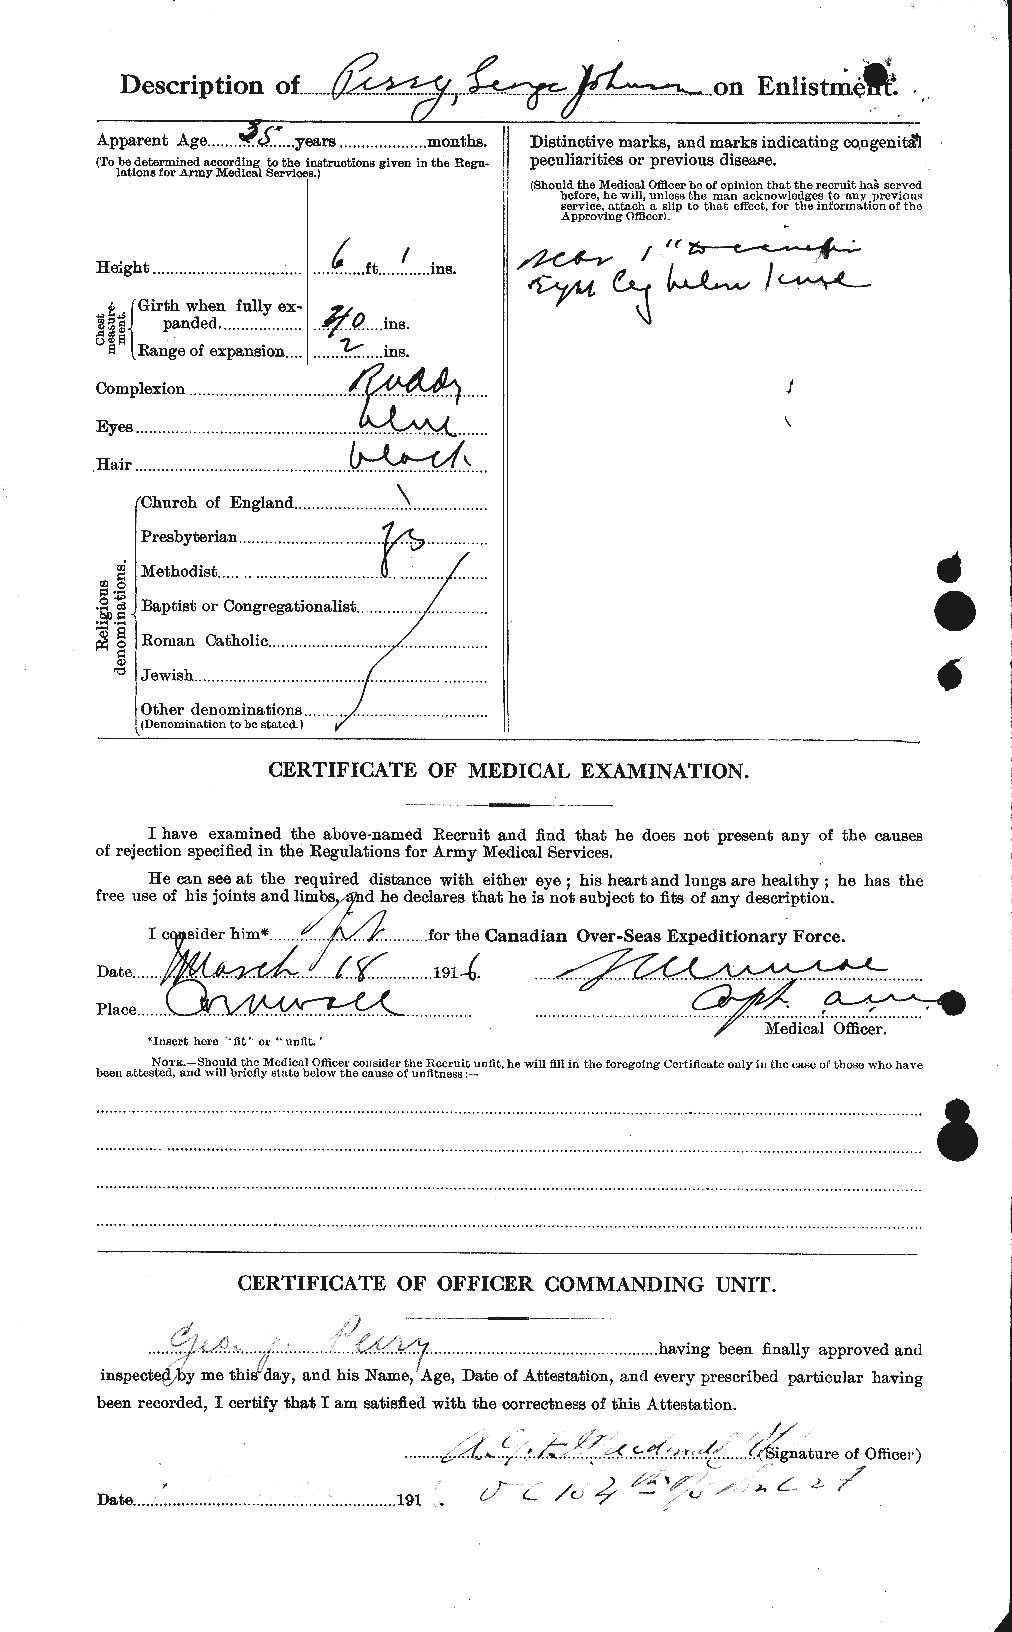 Personnel Records of the First World War - CEF 574862b